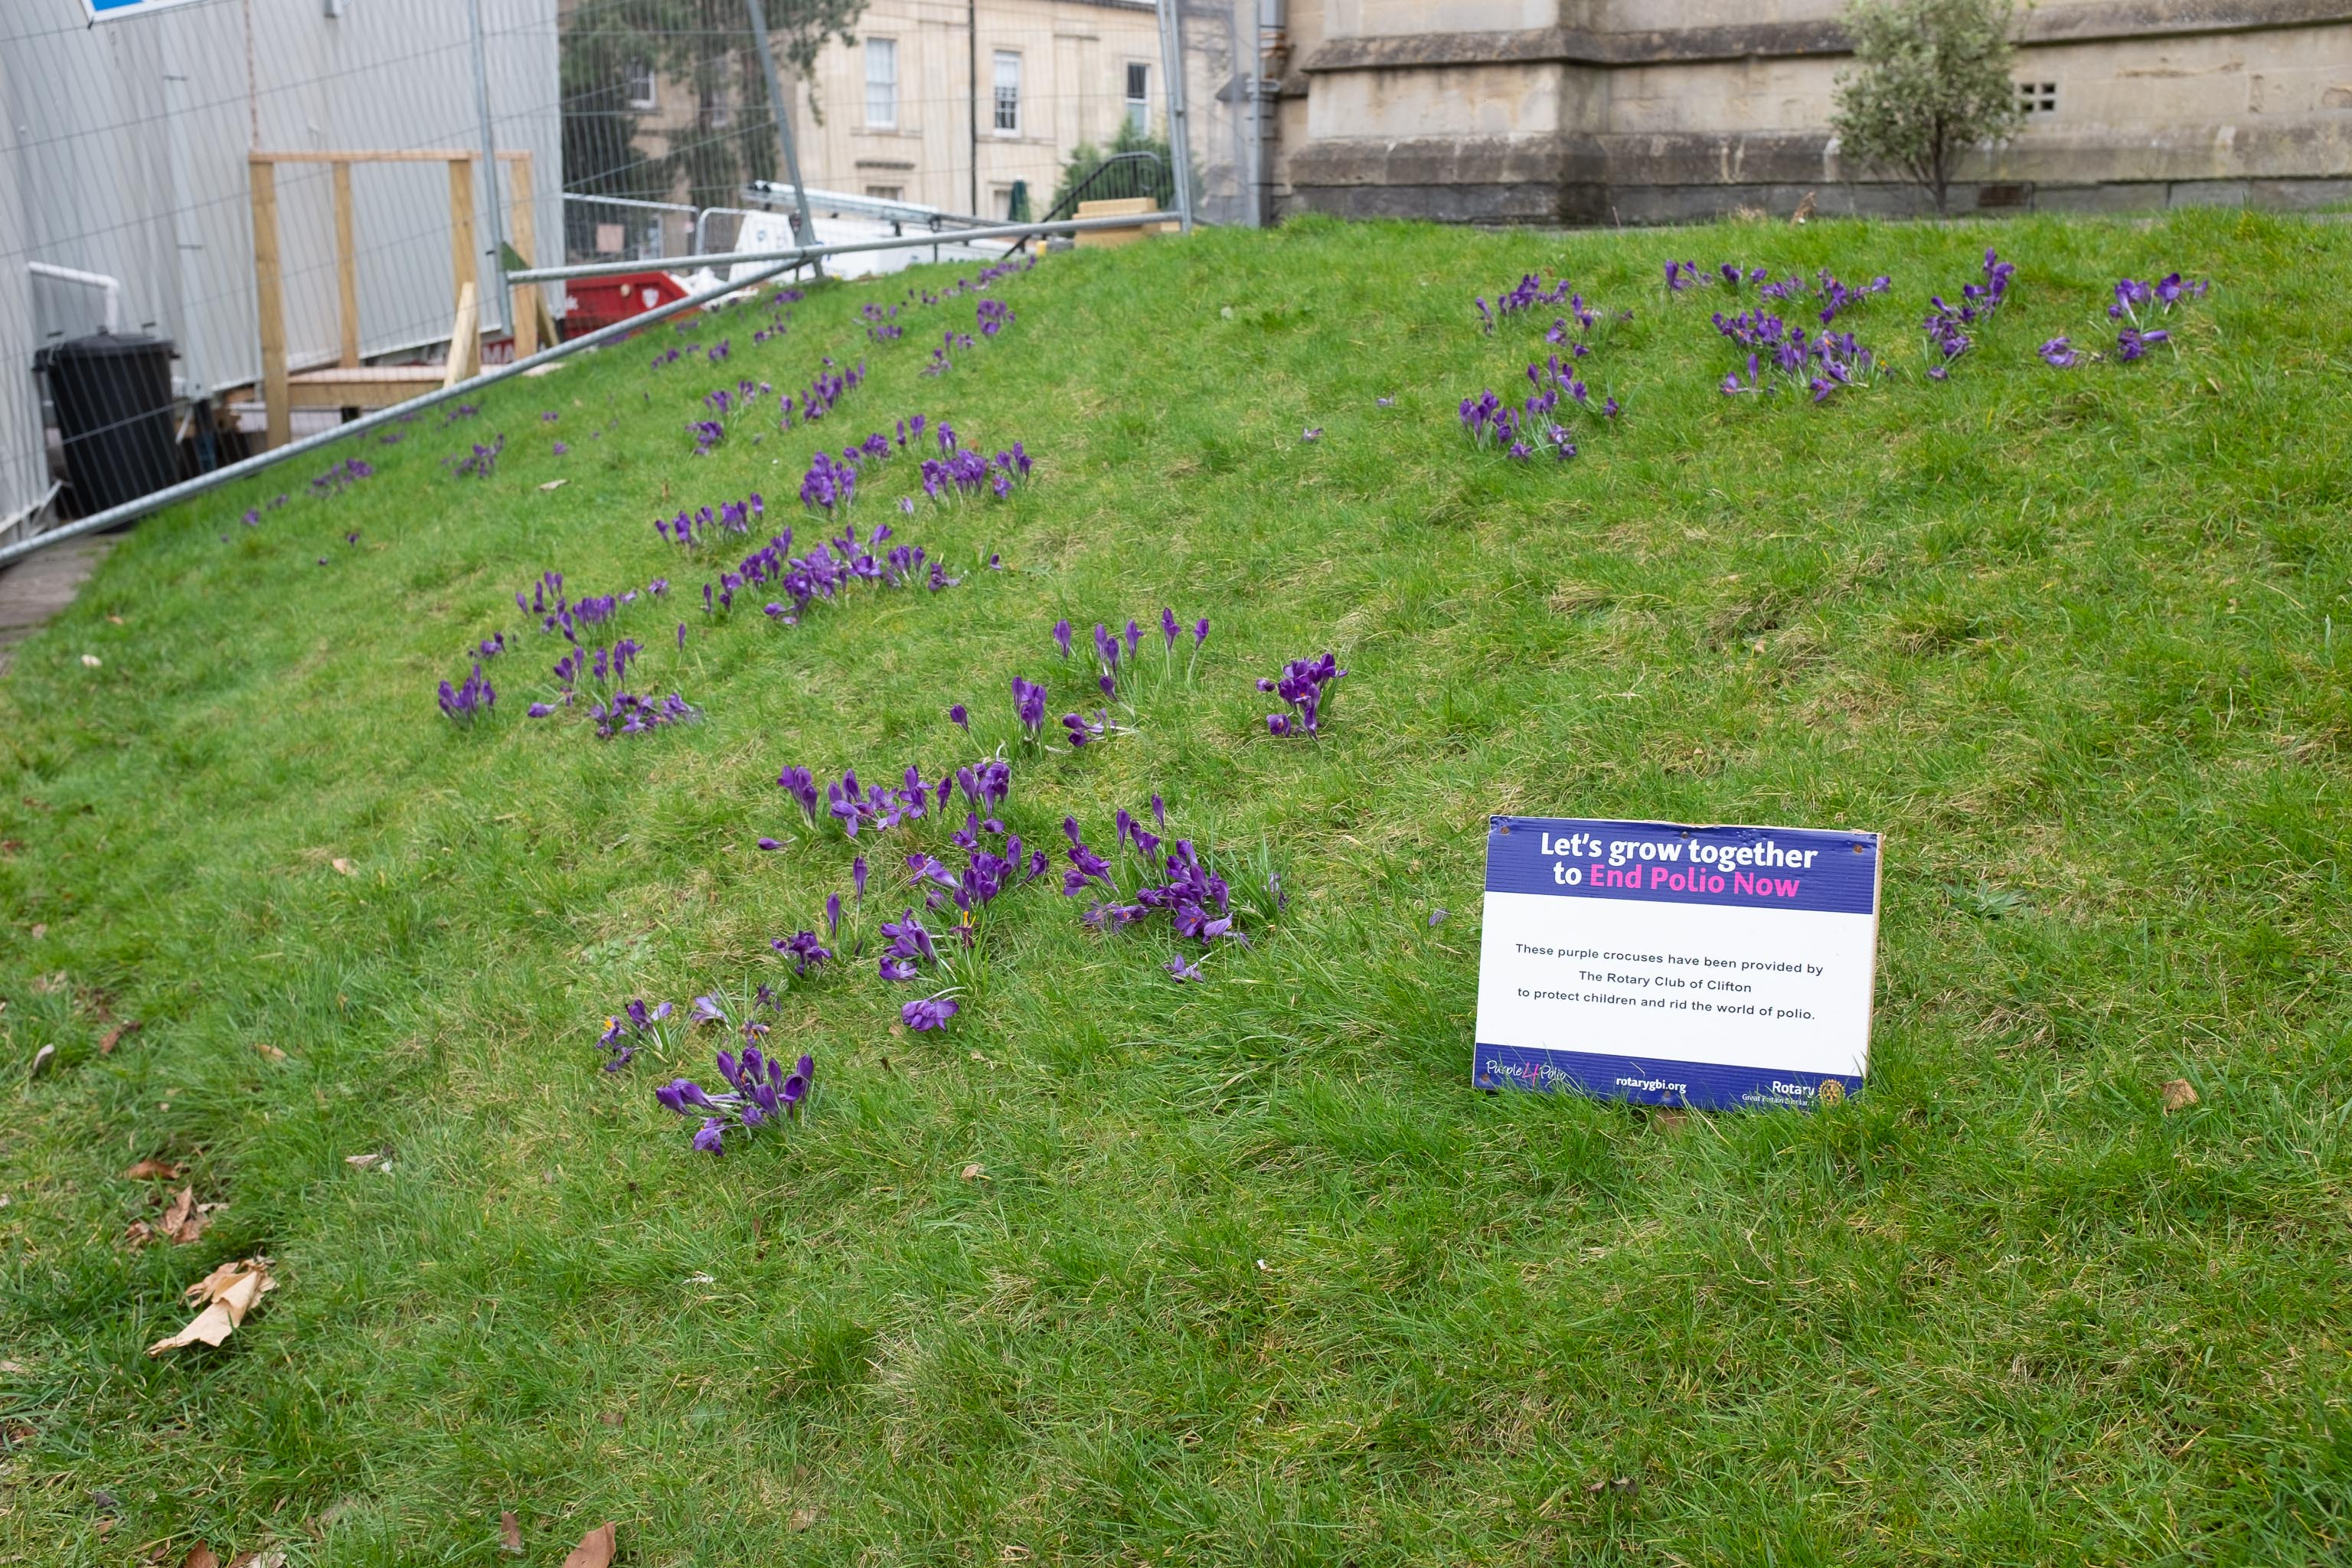 Purple Crocuses
"The Crocus was chosen as the purple colour matched the dye painted on the fingers of children who have been immunised."

I'm still not entirely cl...